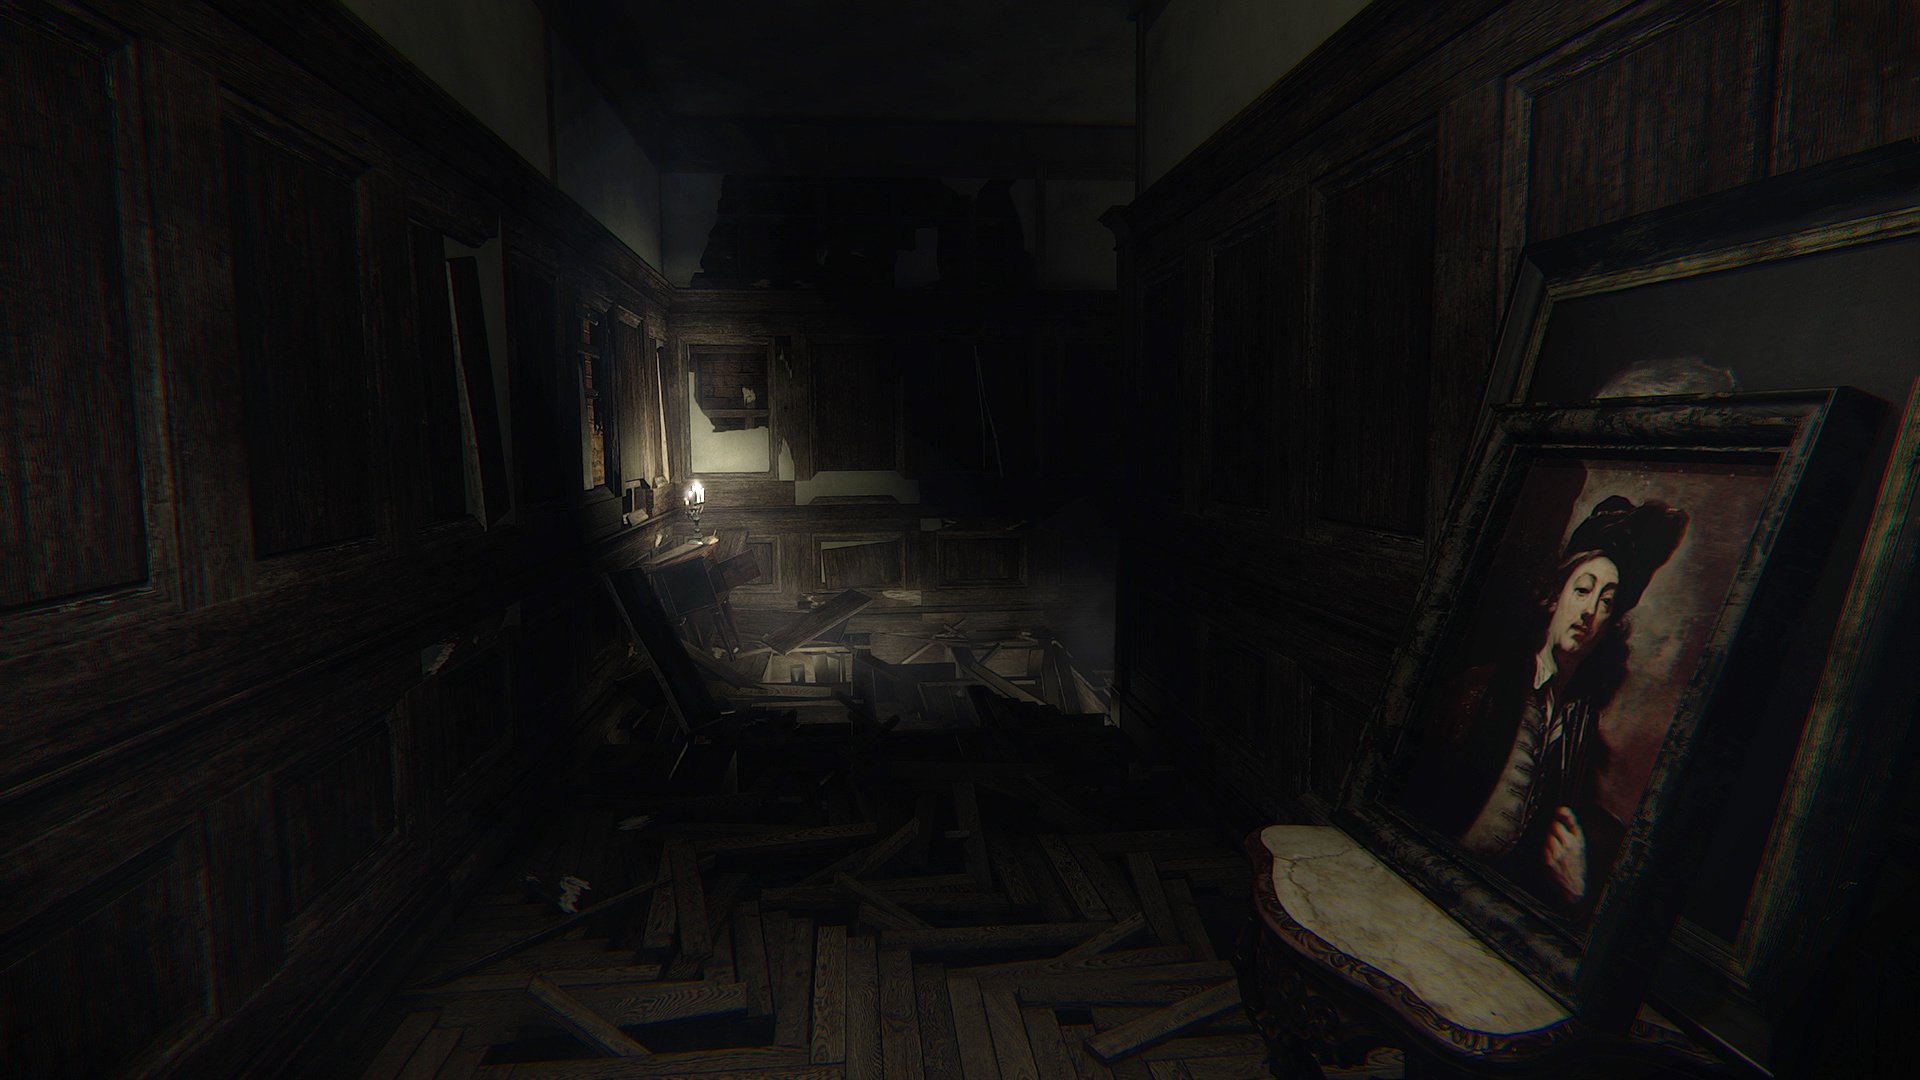 REVIEW, Layers of Fear: Inheritance